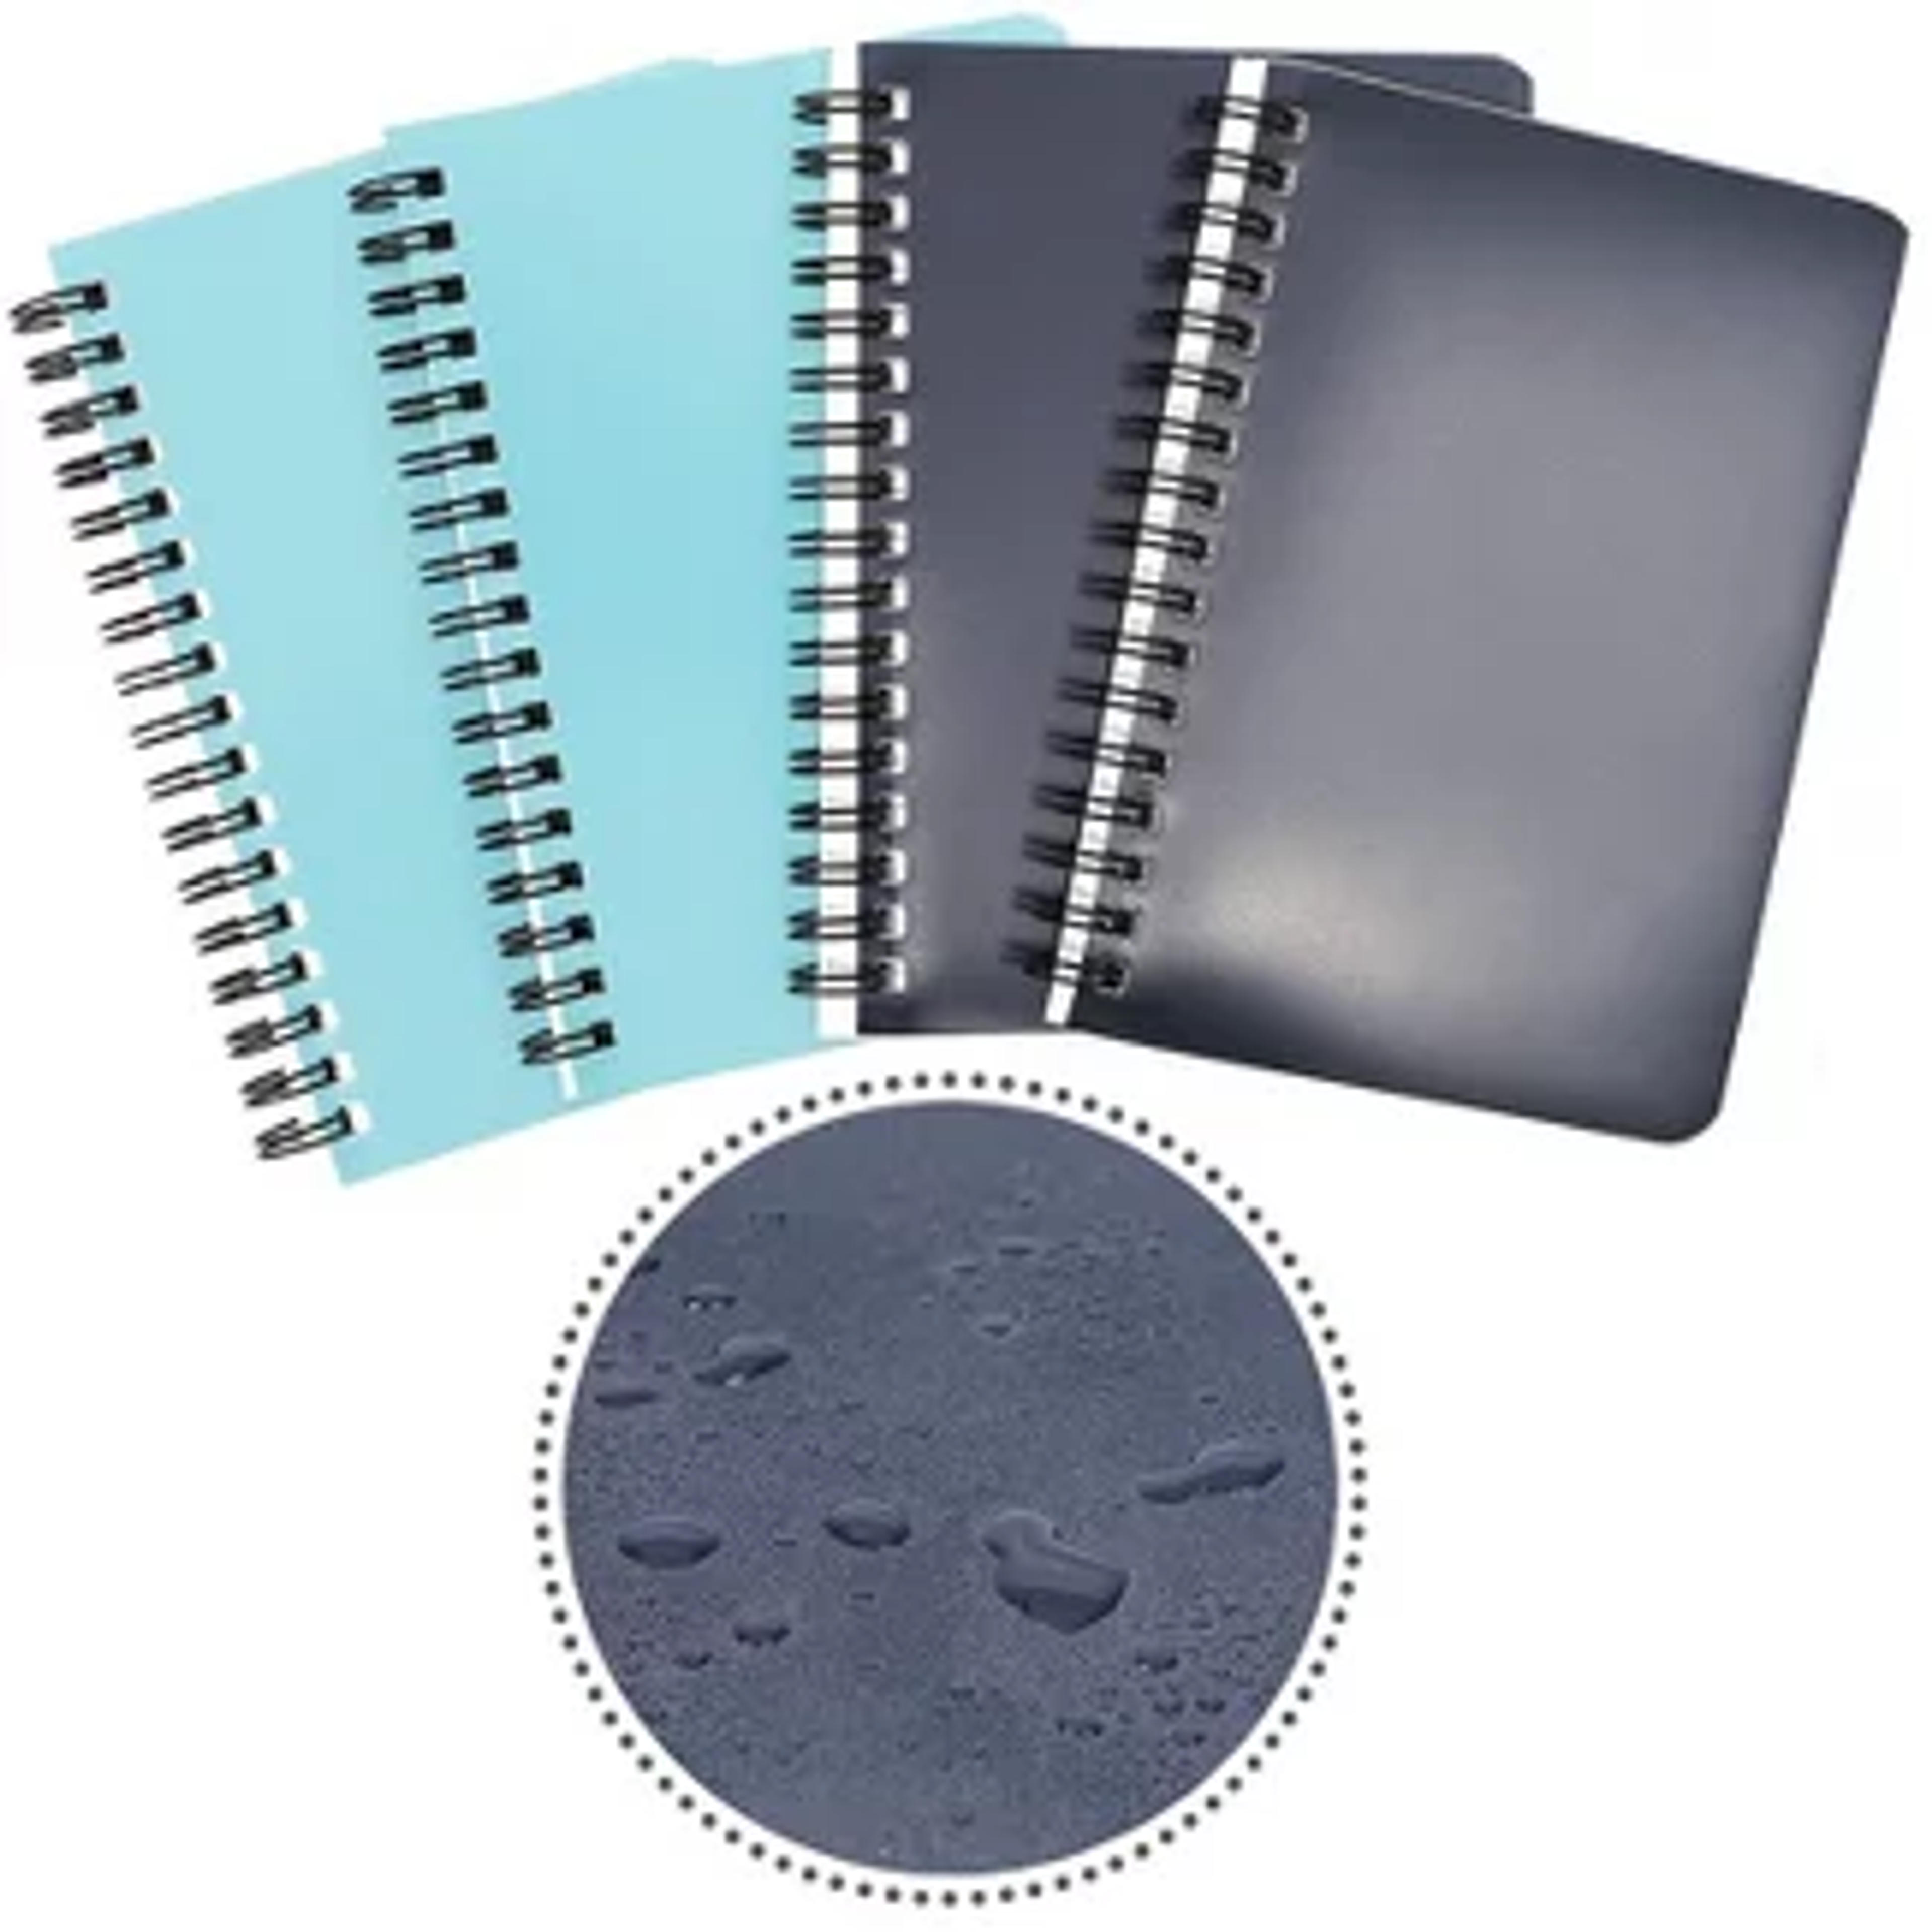 4 Pack Spiral Bound Weatherproof College Ruled Notepads Notebooks Memo Pad Books Lined Paper, 4 X 6 Inches, 50 Sheets Per Book : Target